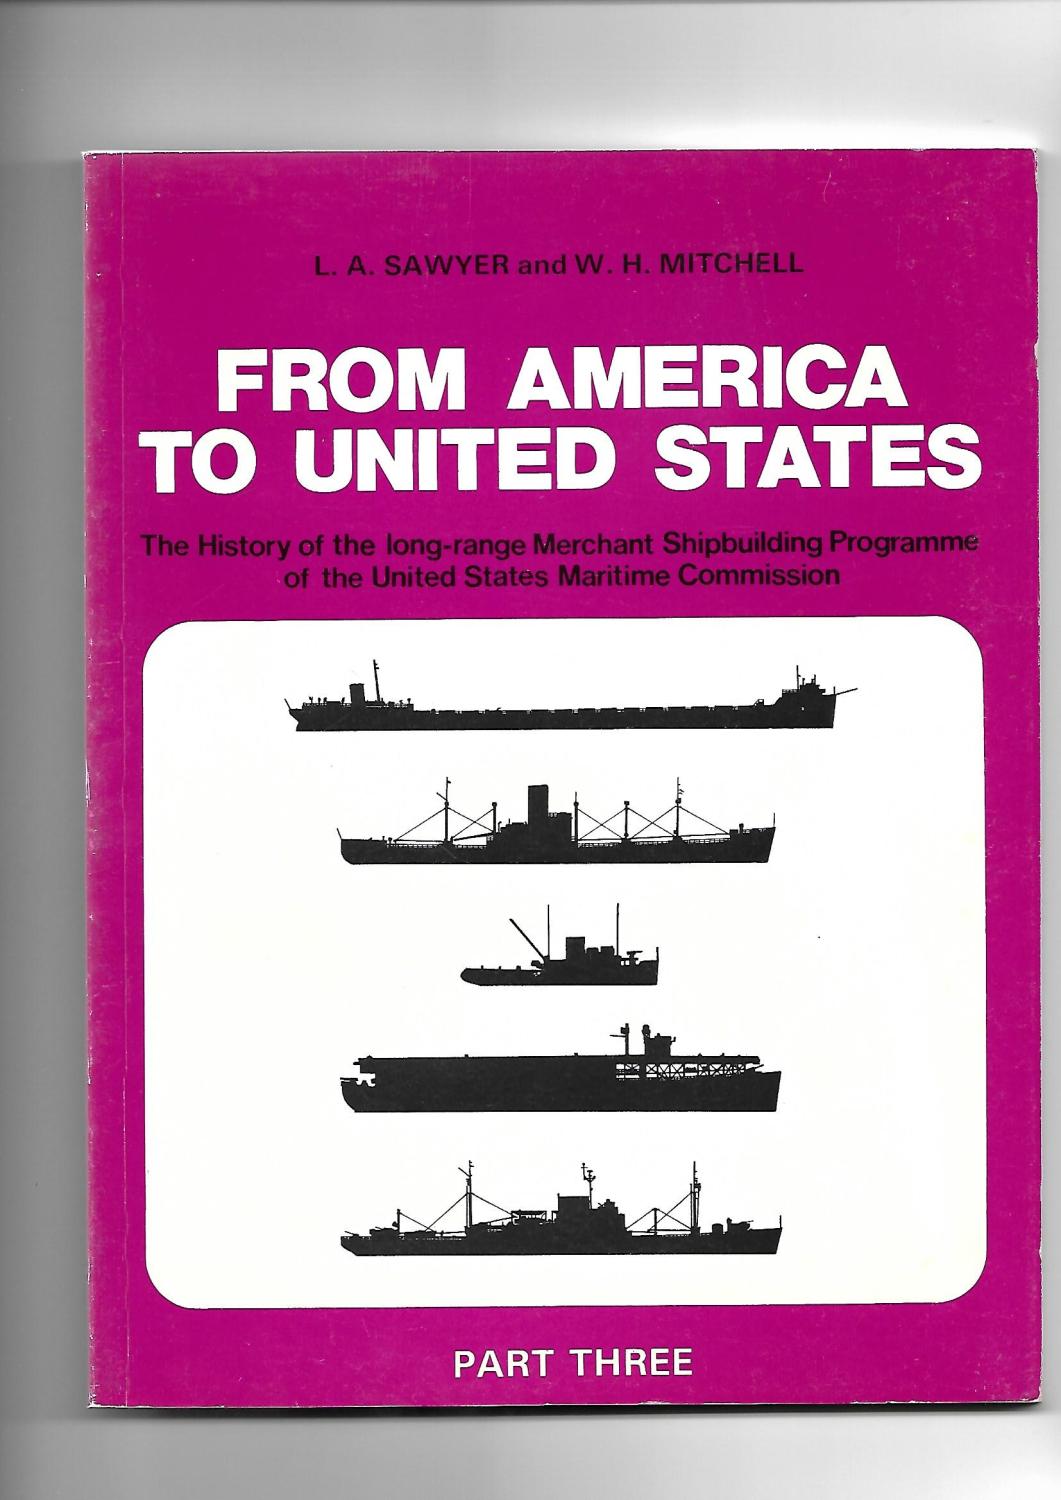 FROM AMERICA TO UNITED STATES In Four Parts: The History of the Merchant Ship types built in the United States of America under the Long-Range Programme of the Maritime Commission: Part Three